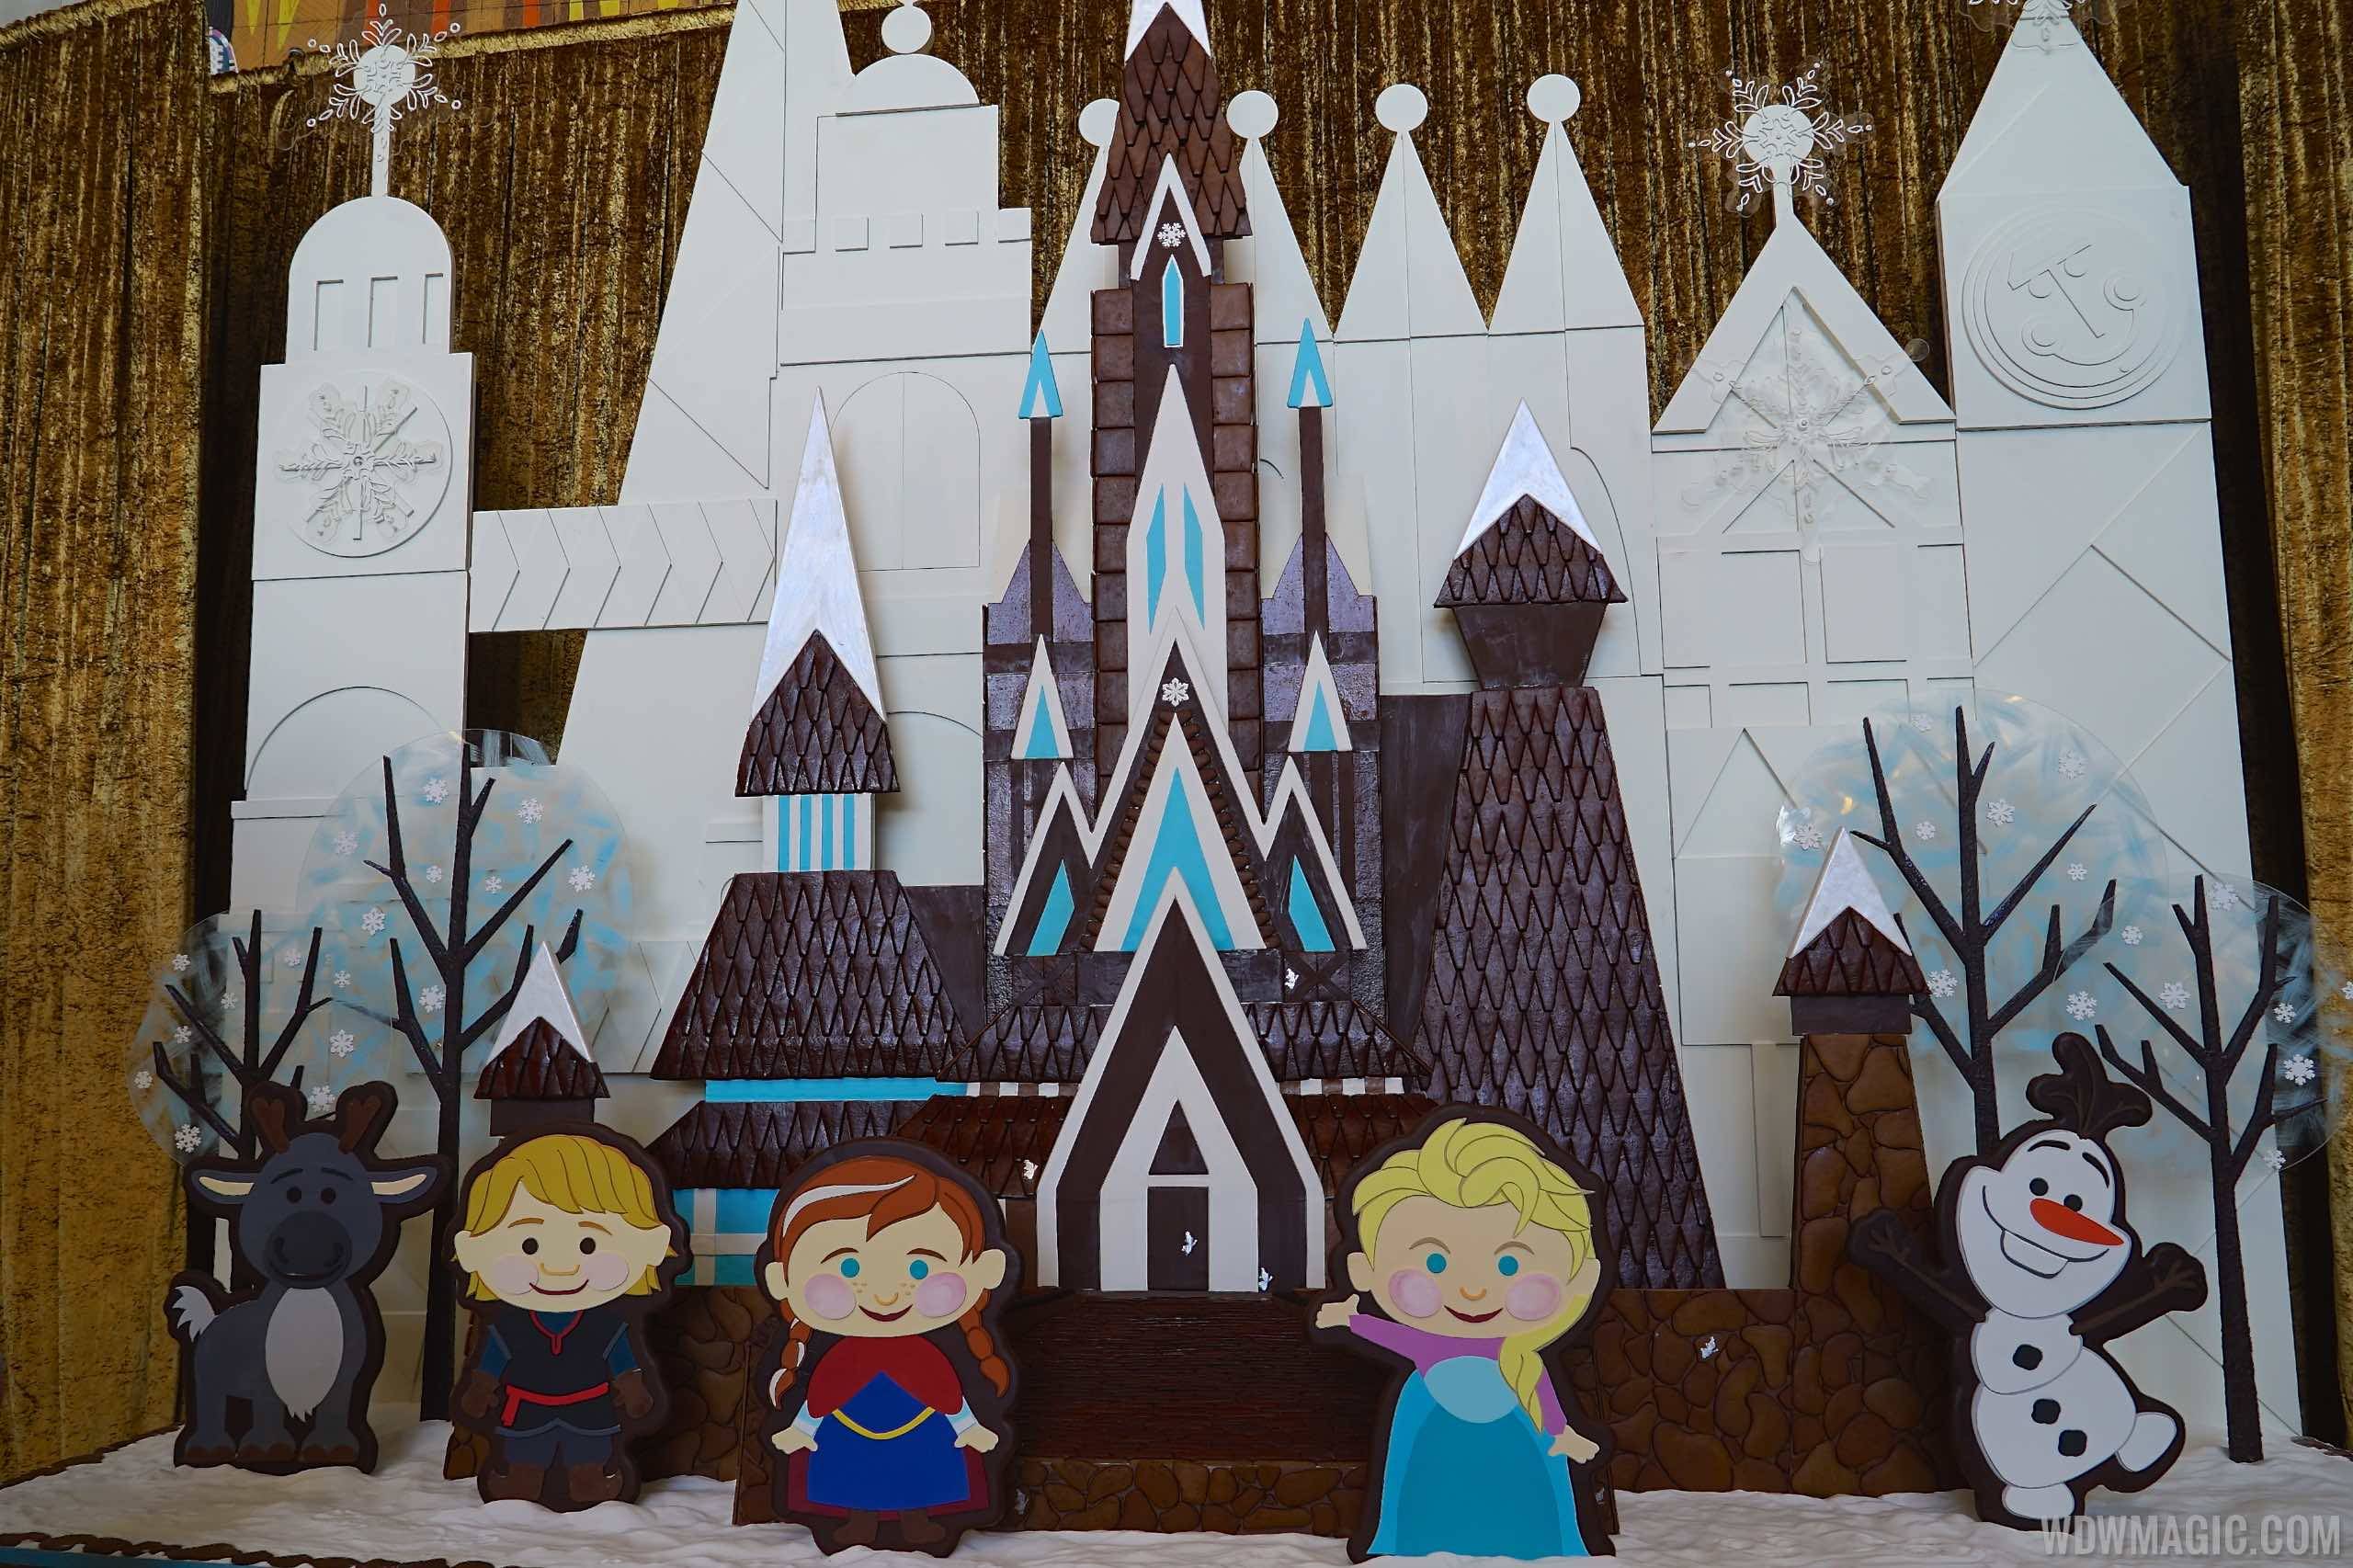 Disney's Contemporary Resort 2014 'Frozen' themed Gingerbread House